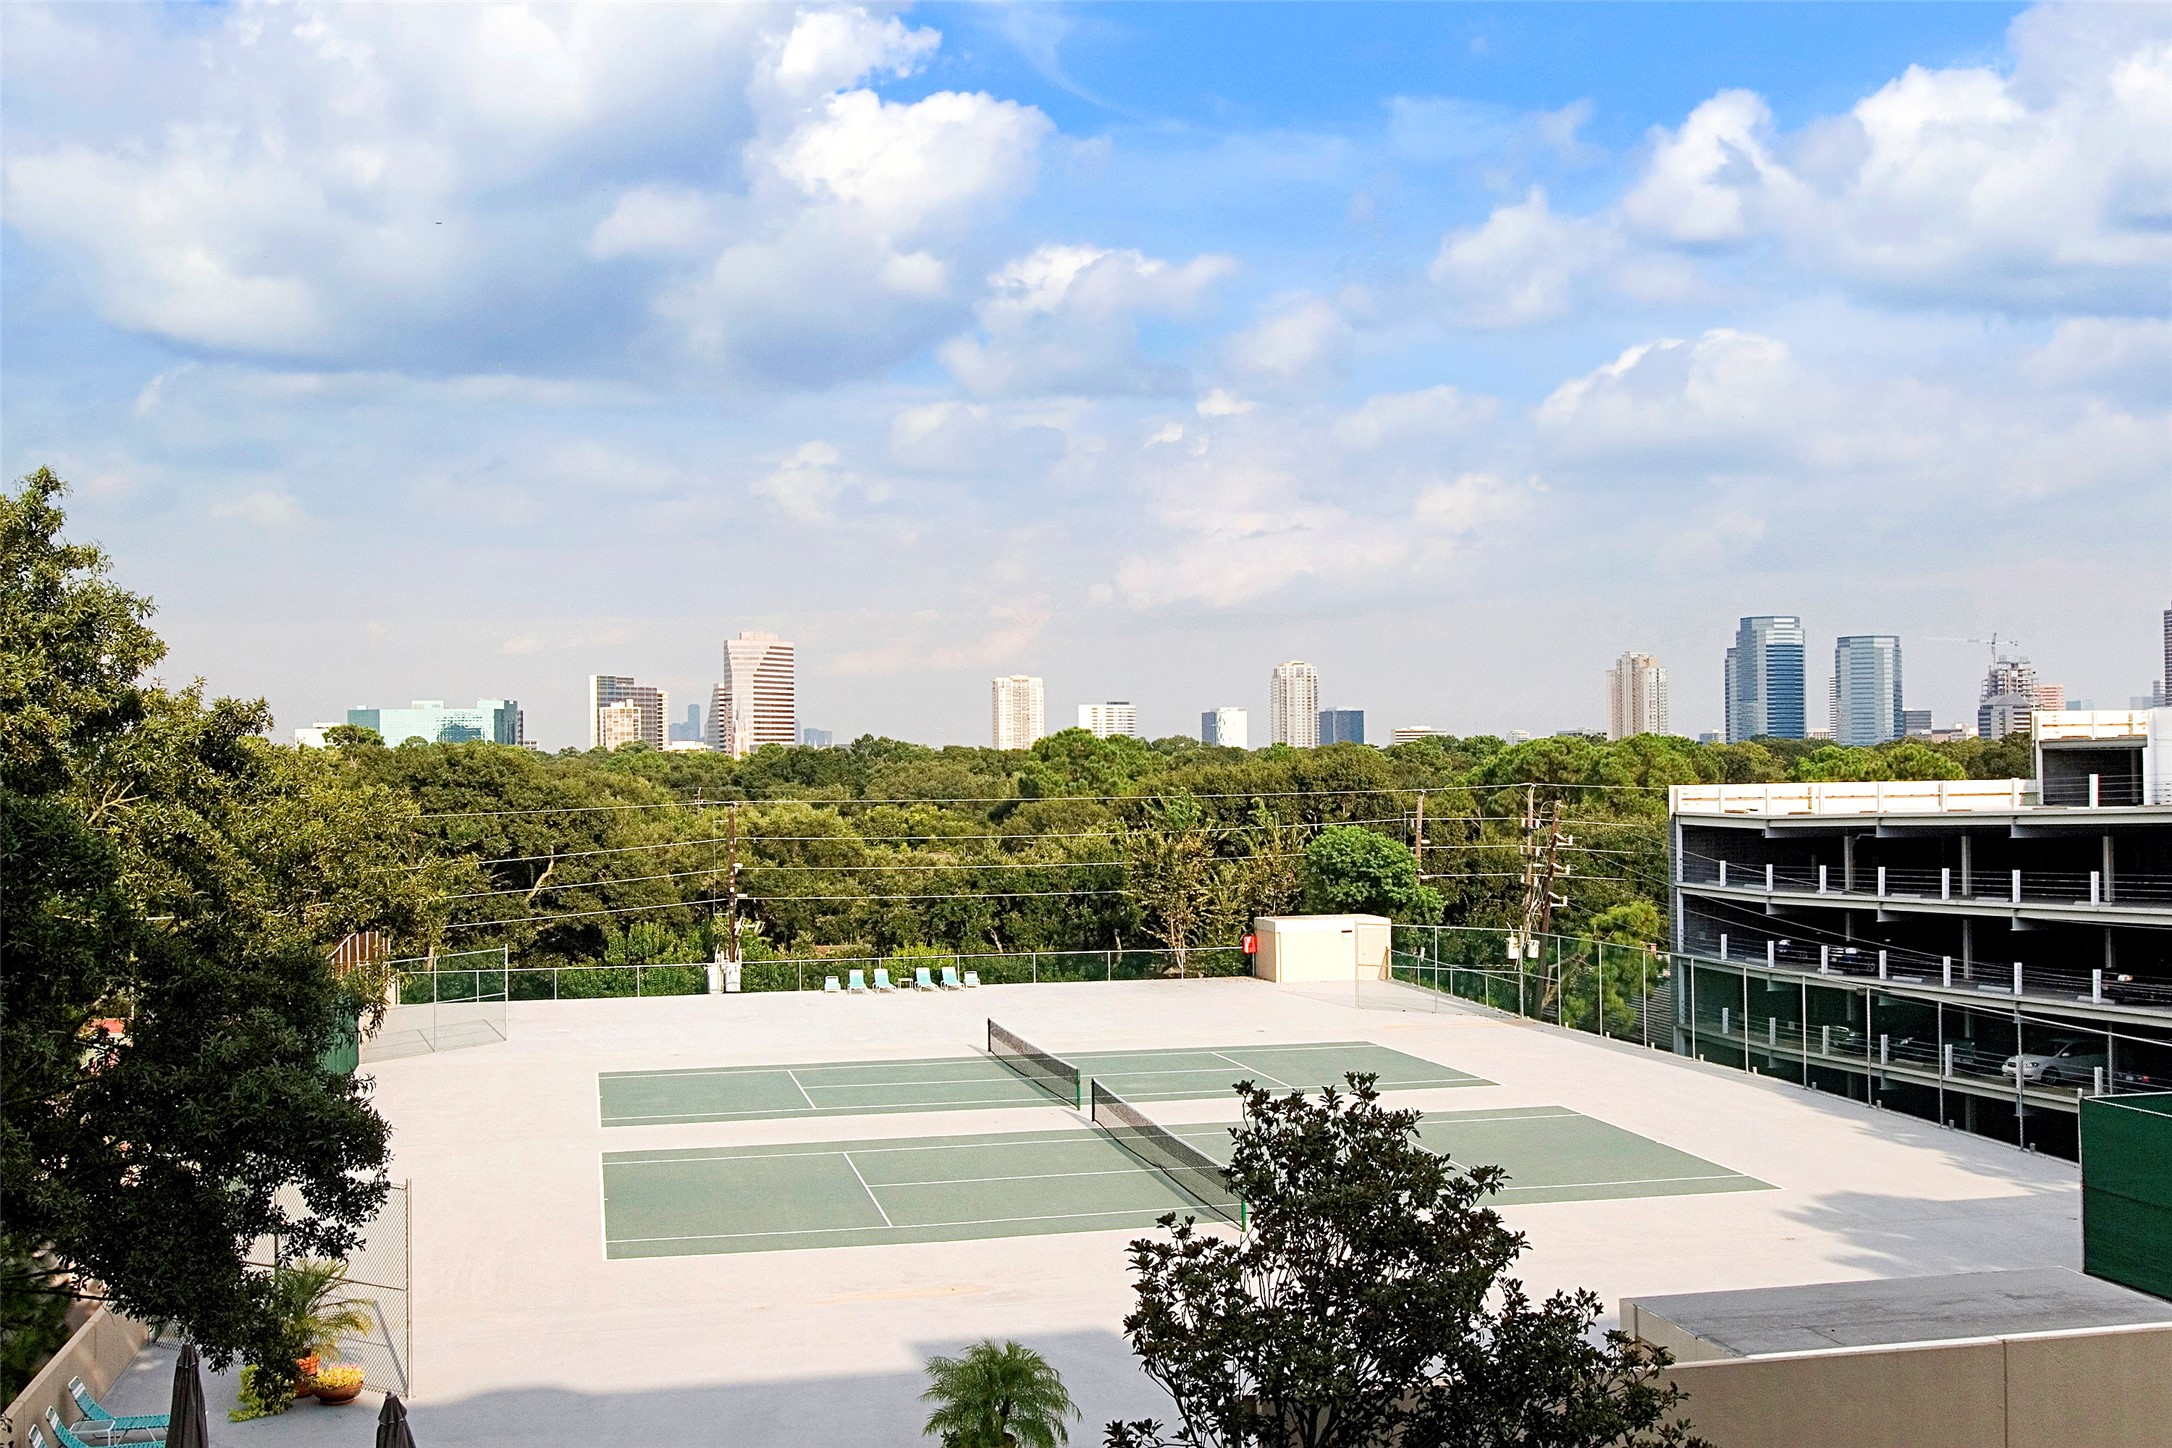 Community Tennis Courts:  Located above the parking garage. (Scheduled for resurfacing)